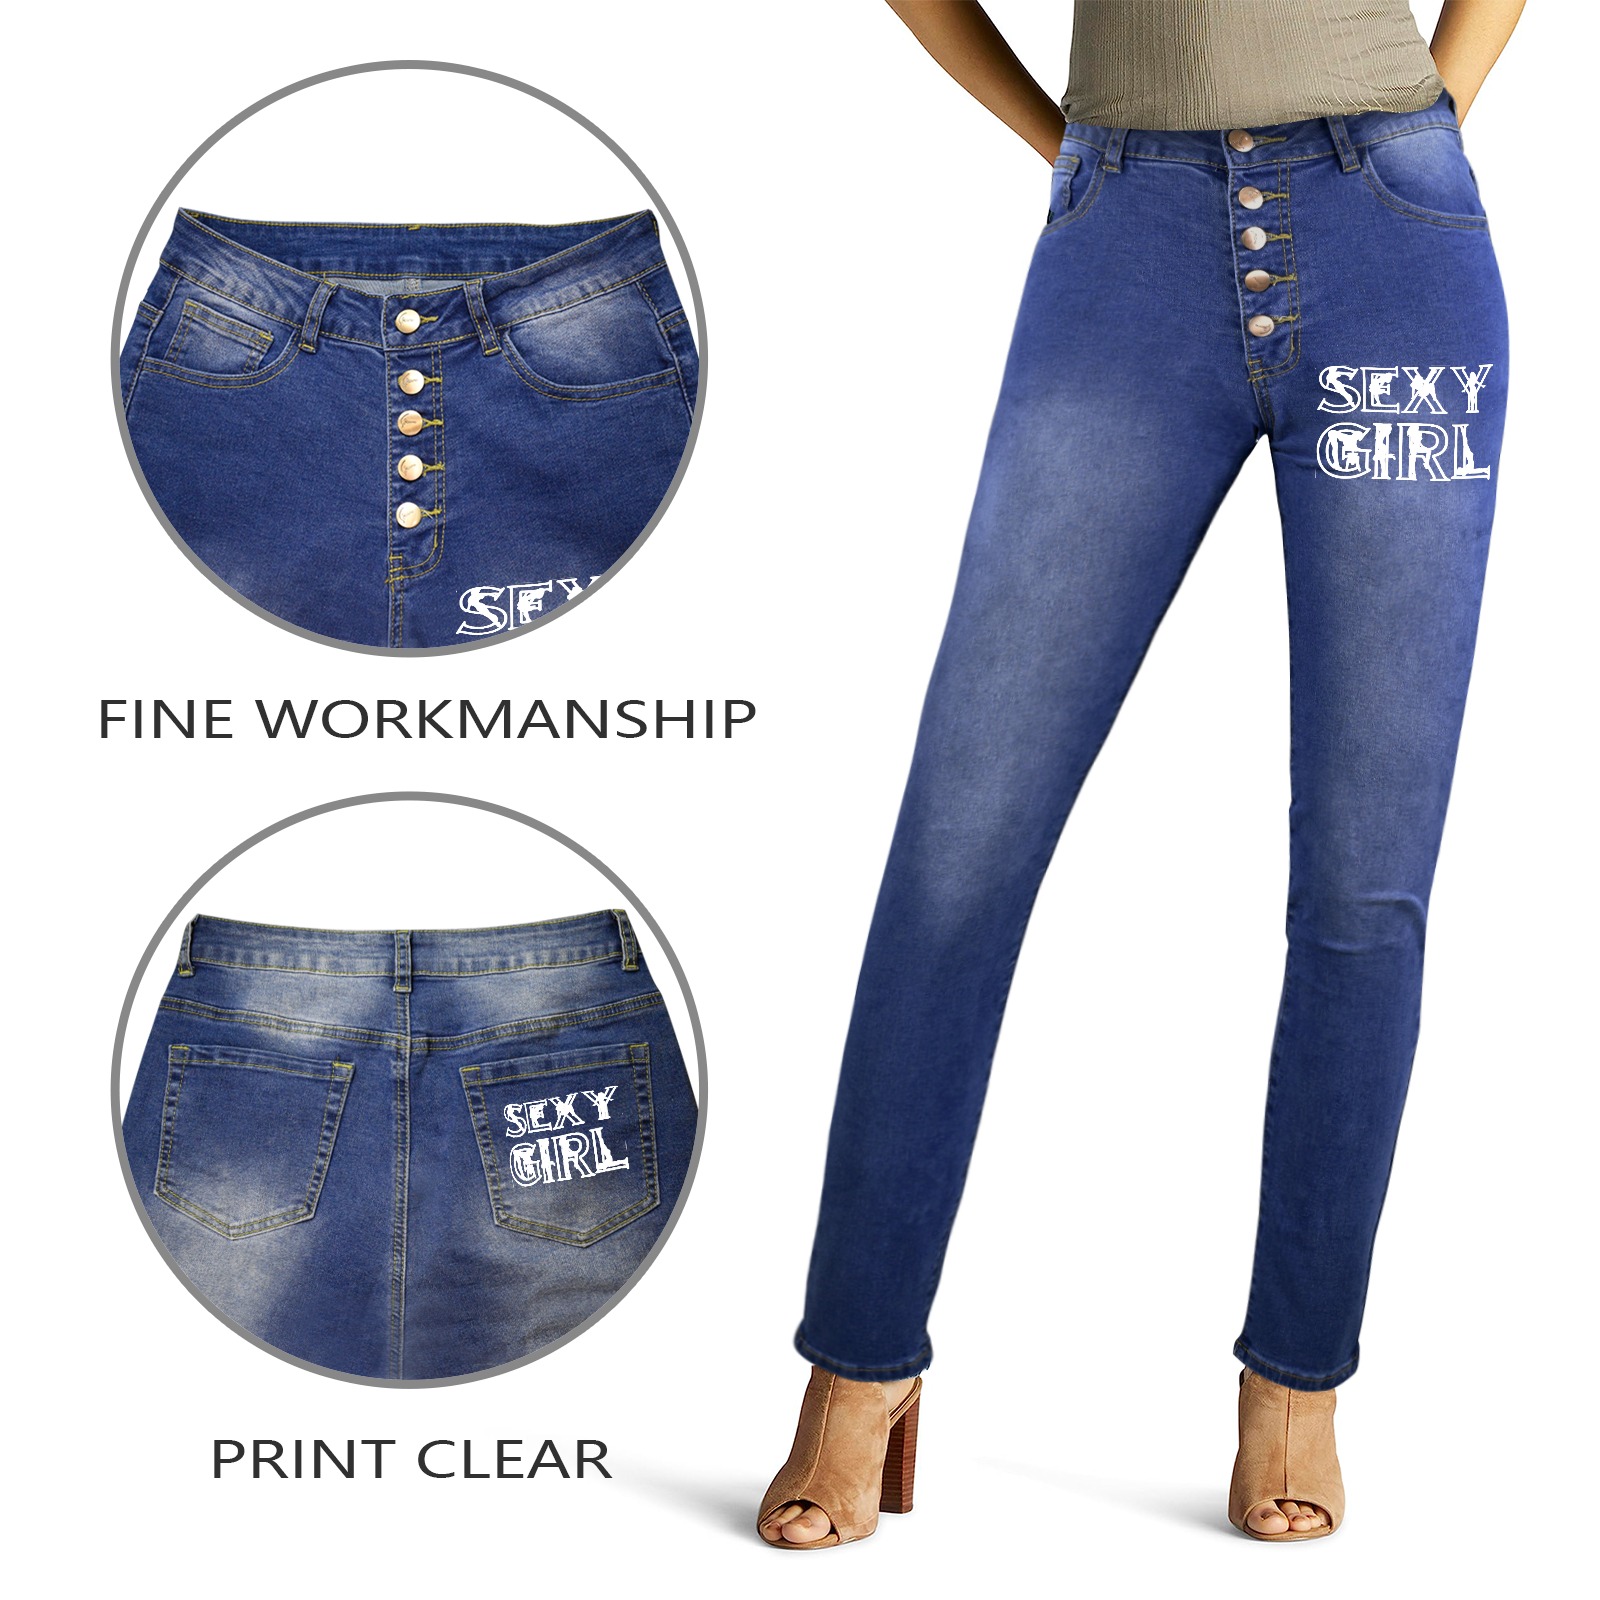 Sexy girl cool white text and women silhouettes. Women's Jeans (Front&Back Printing)